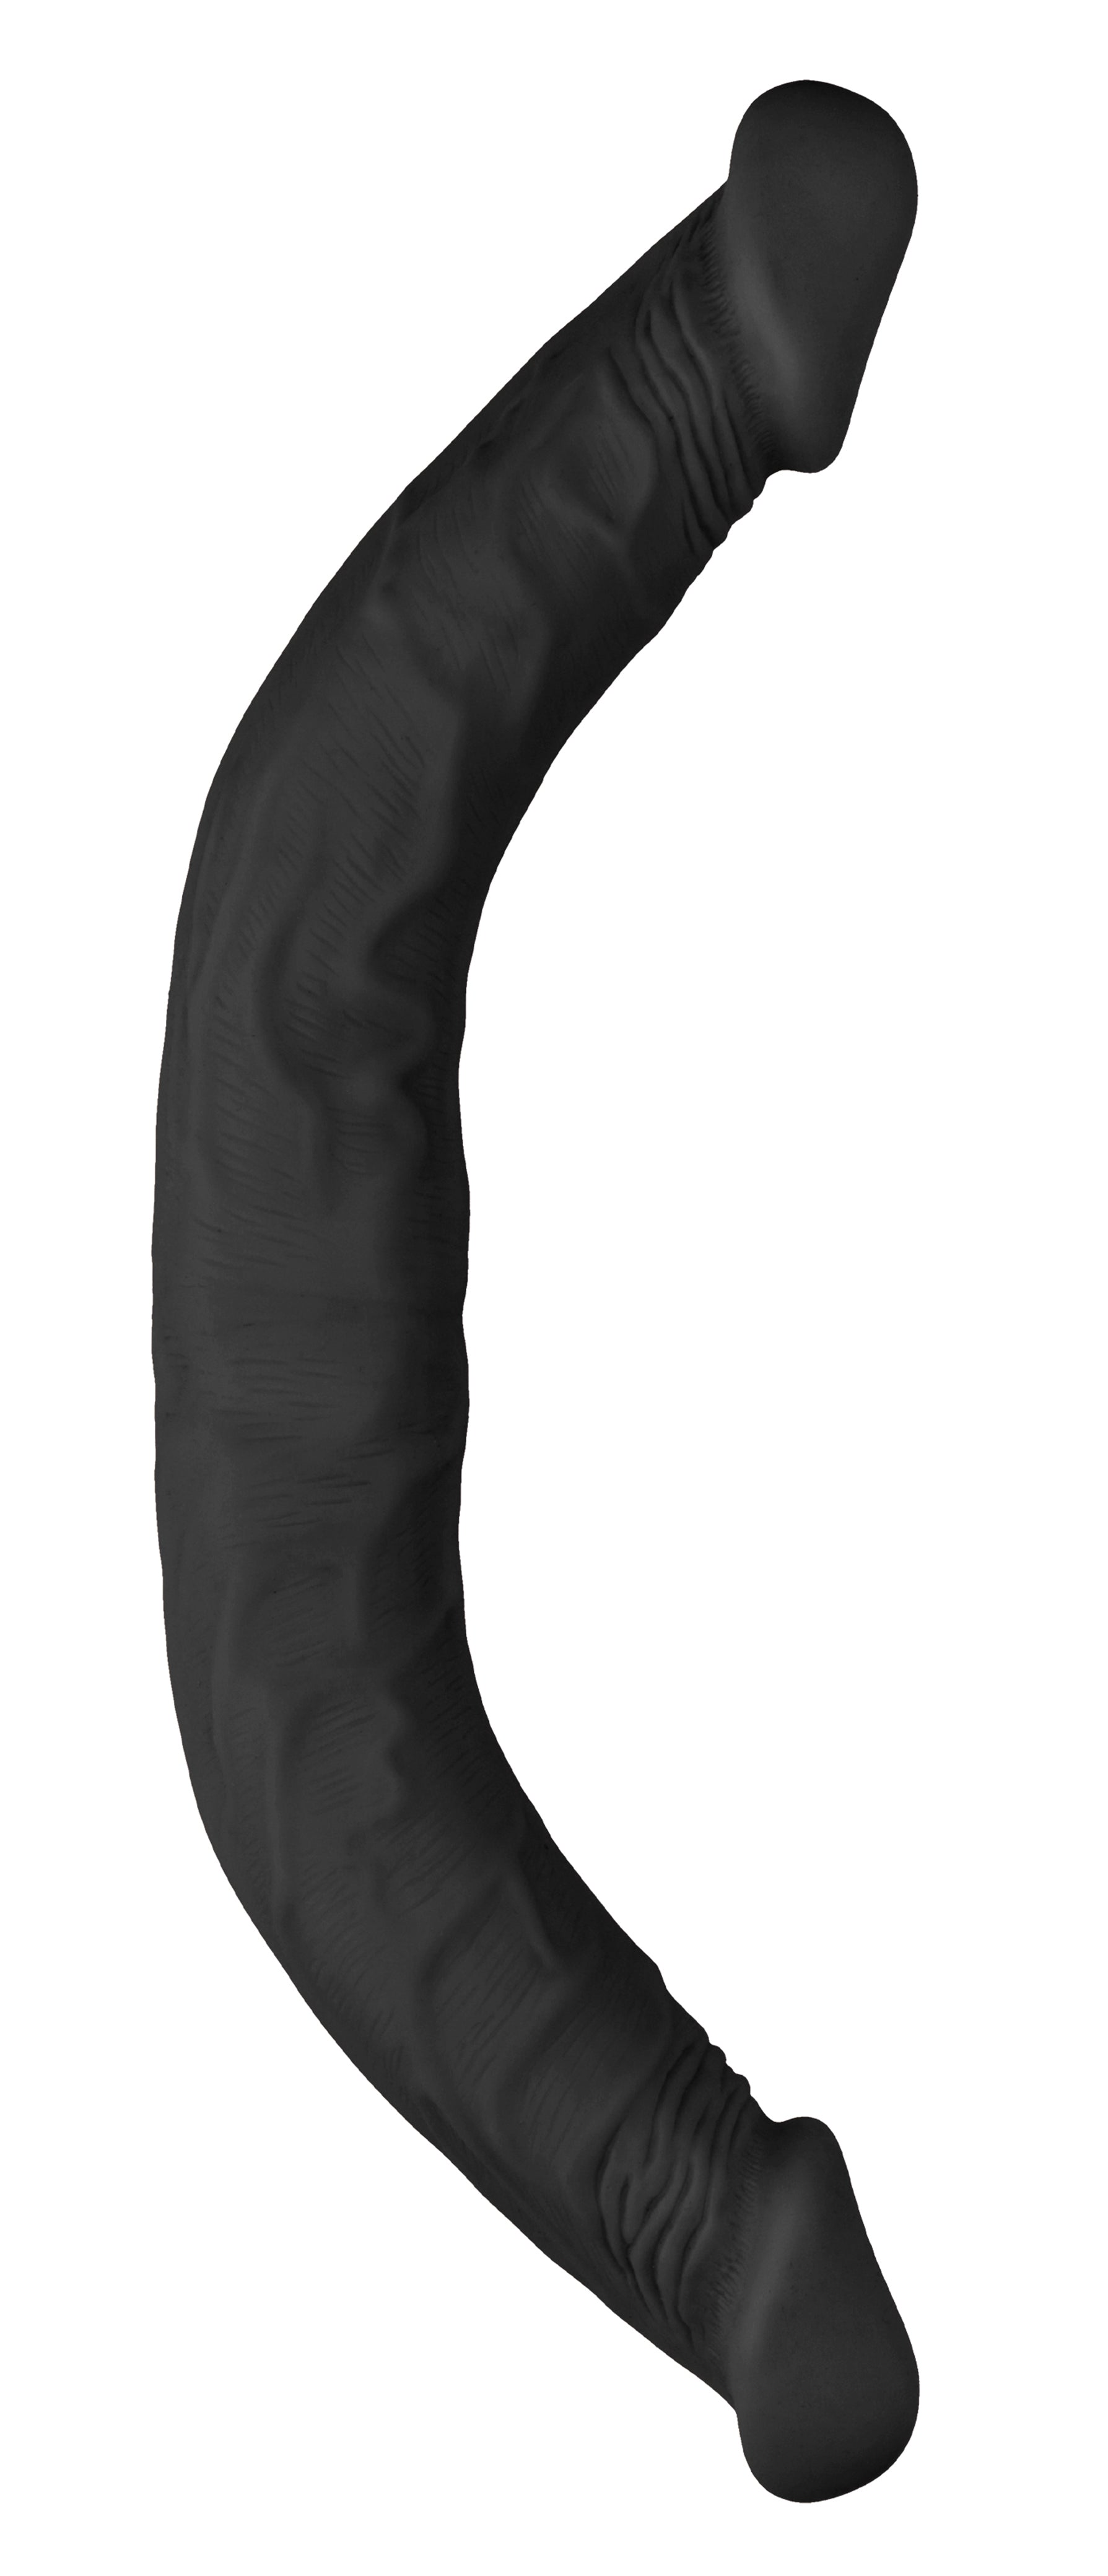 18 Inch Double Dong - Black